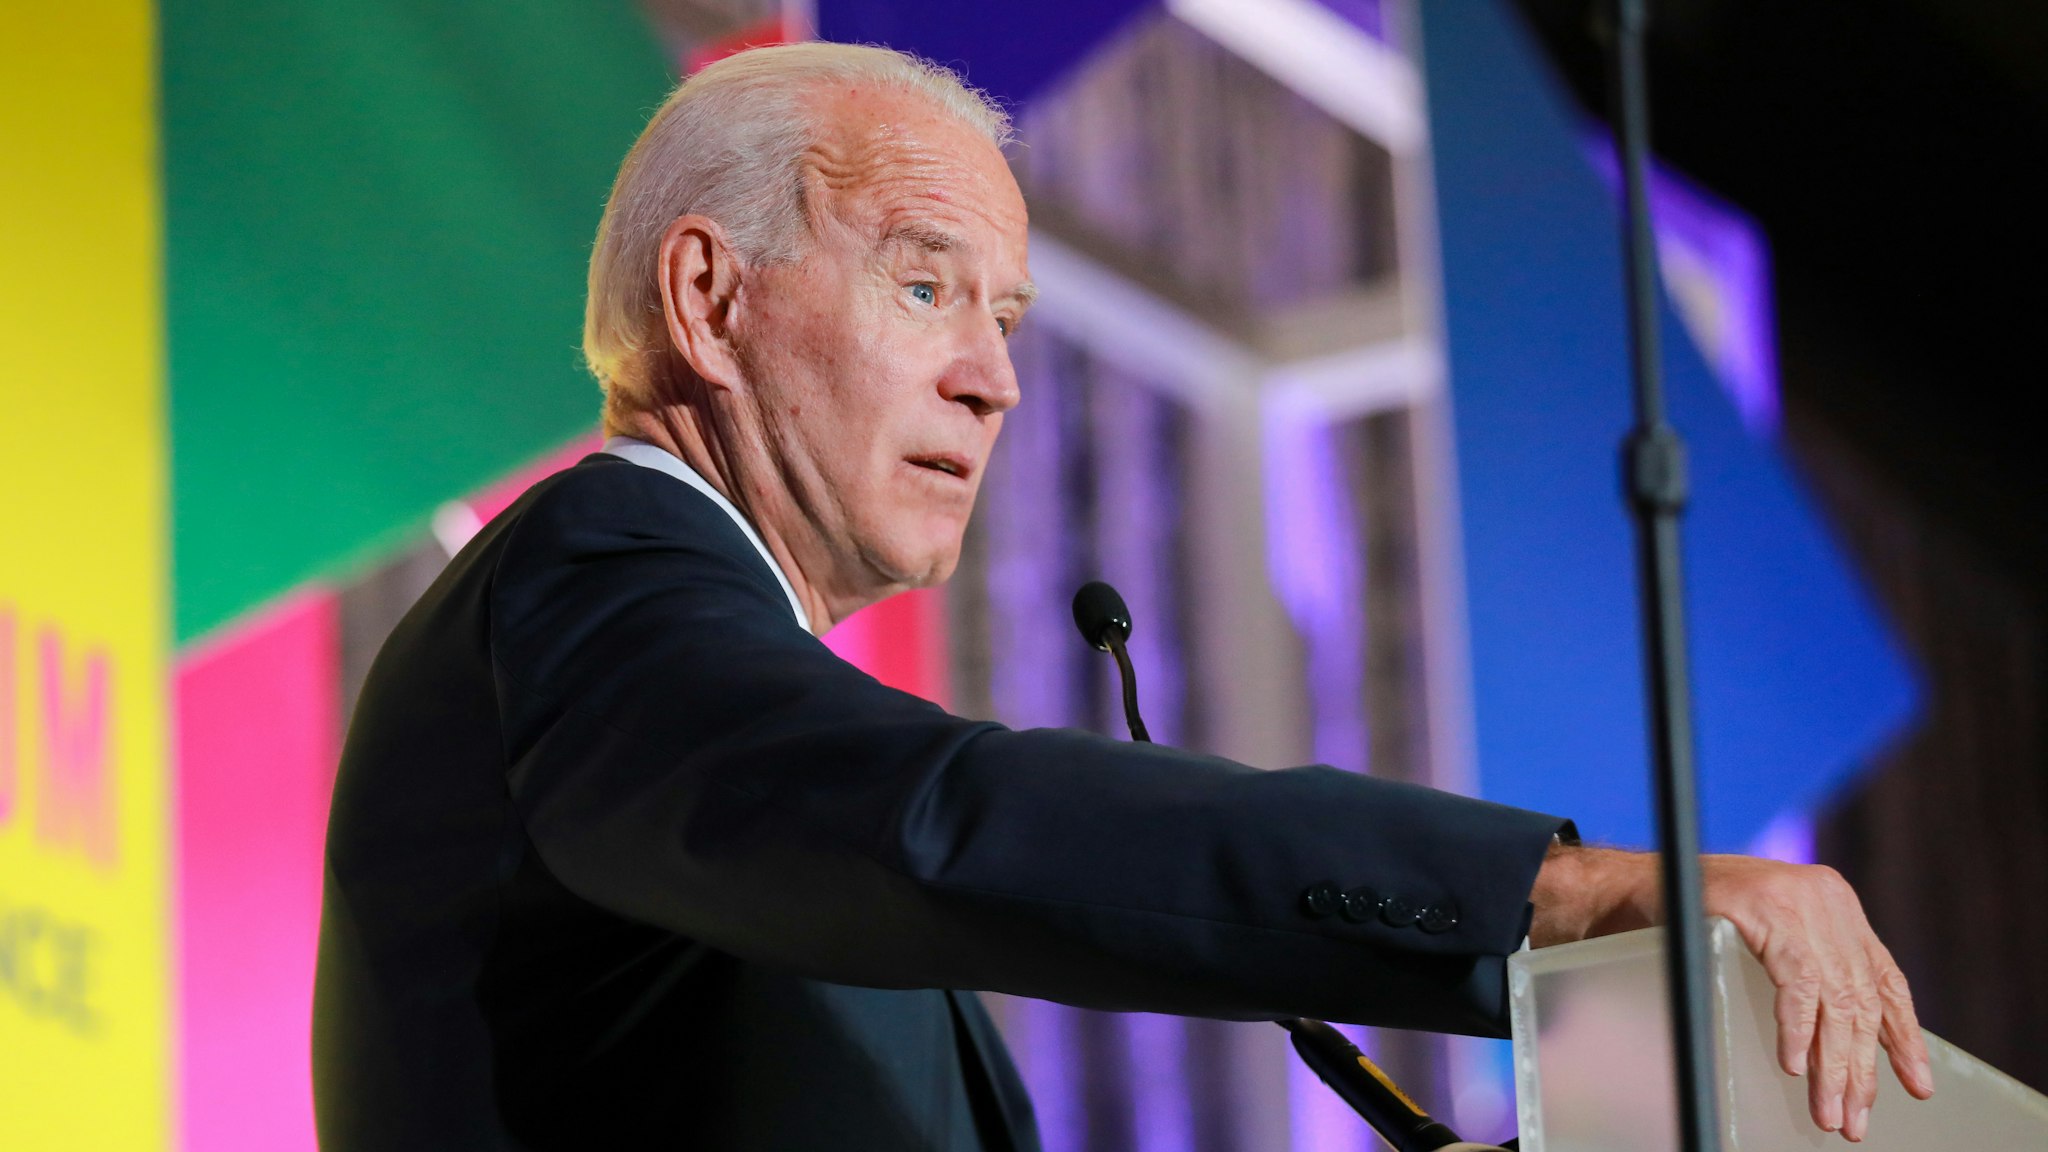 Former U.S. Vice President Joe Biden, a 2020 Democratic presidential candidate, speaks during the DNC Women's Leadership Forum conference in Washington, D.C., U.S., on Thursday, Oct. 17, 2019. The WLF serves as the Democratic Party's centralized hub for activation, information, and fundraising for Democratic women and their allies.